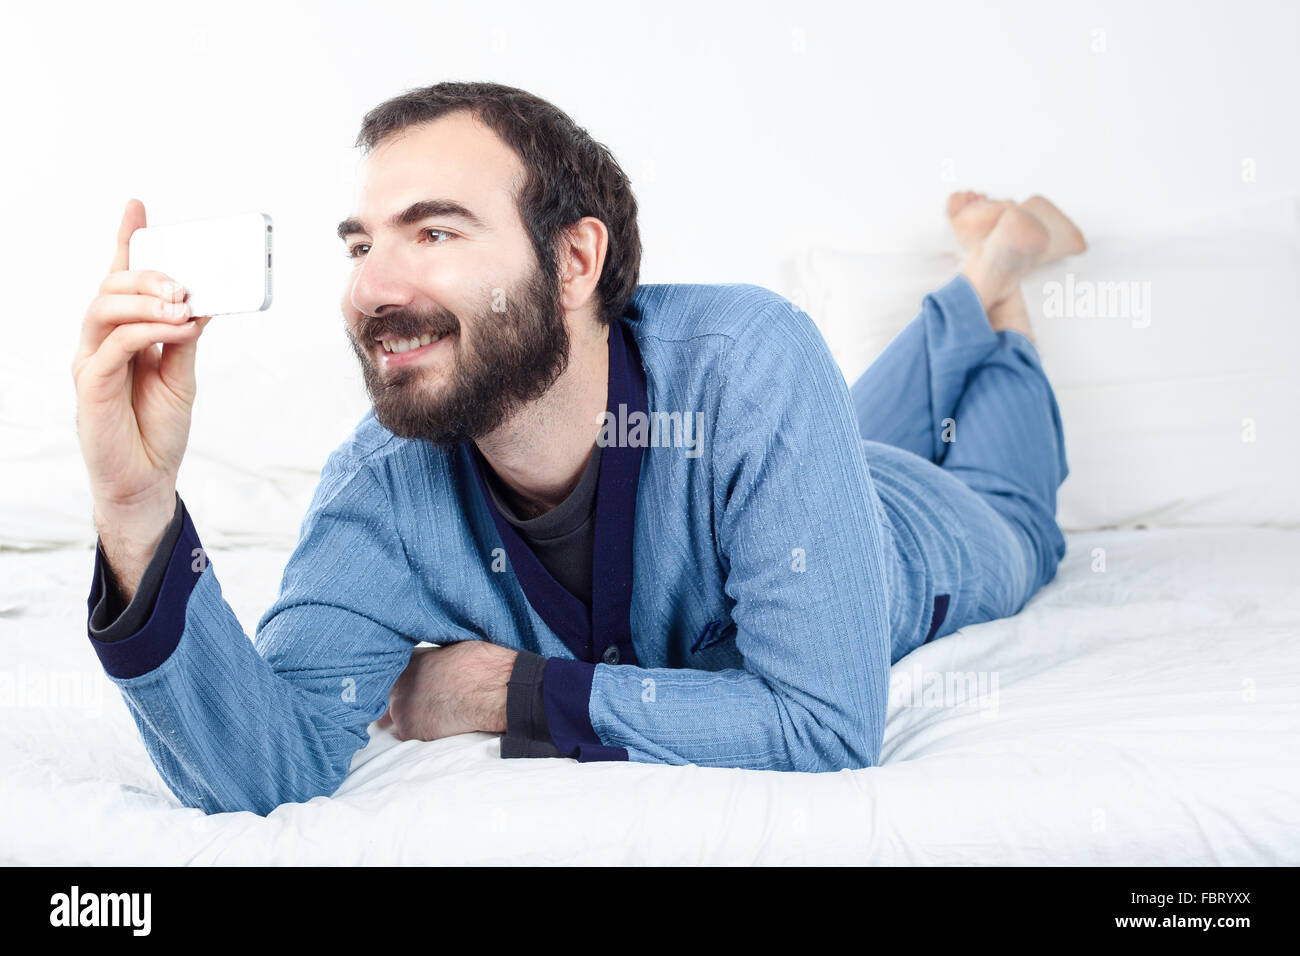 Smiling Man with Pajamas Taking a Selfie with a Smartphone Stock Photo